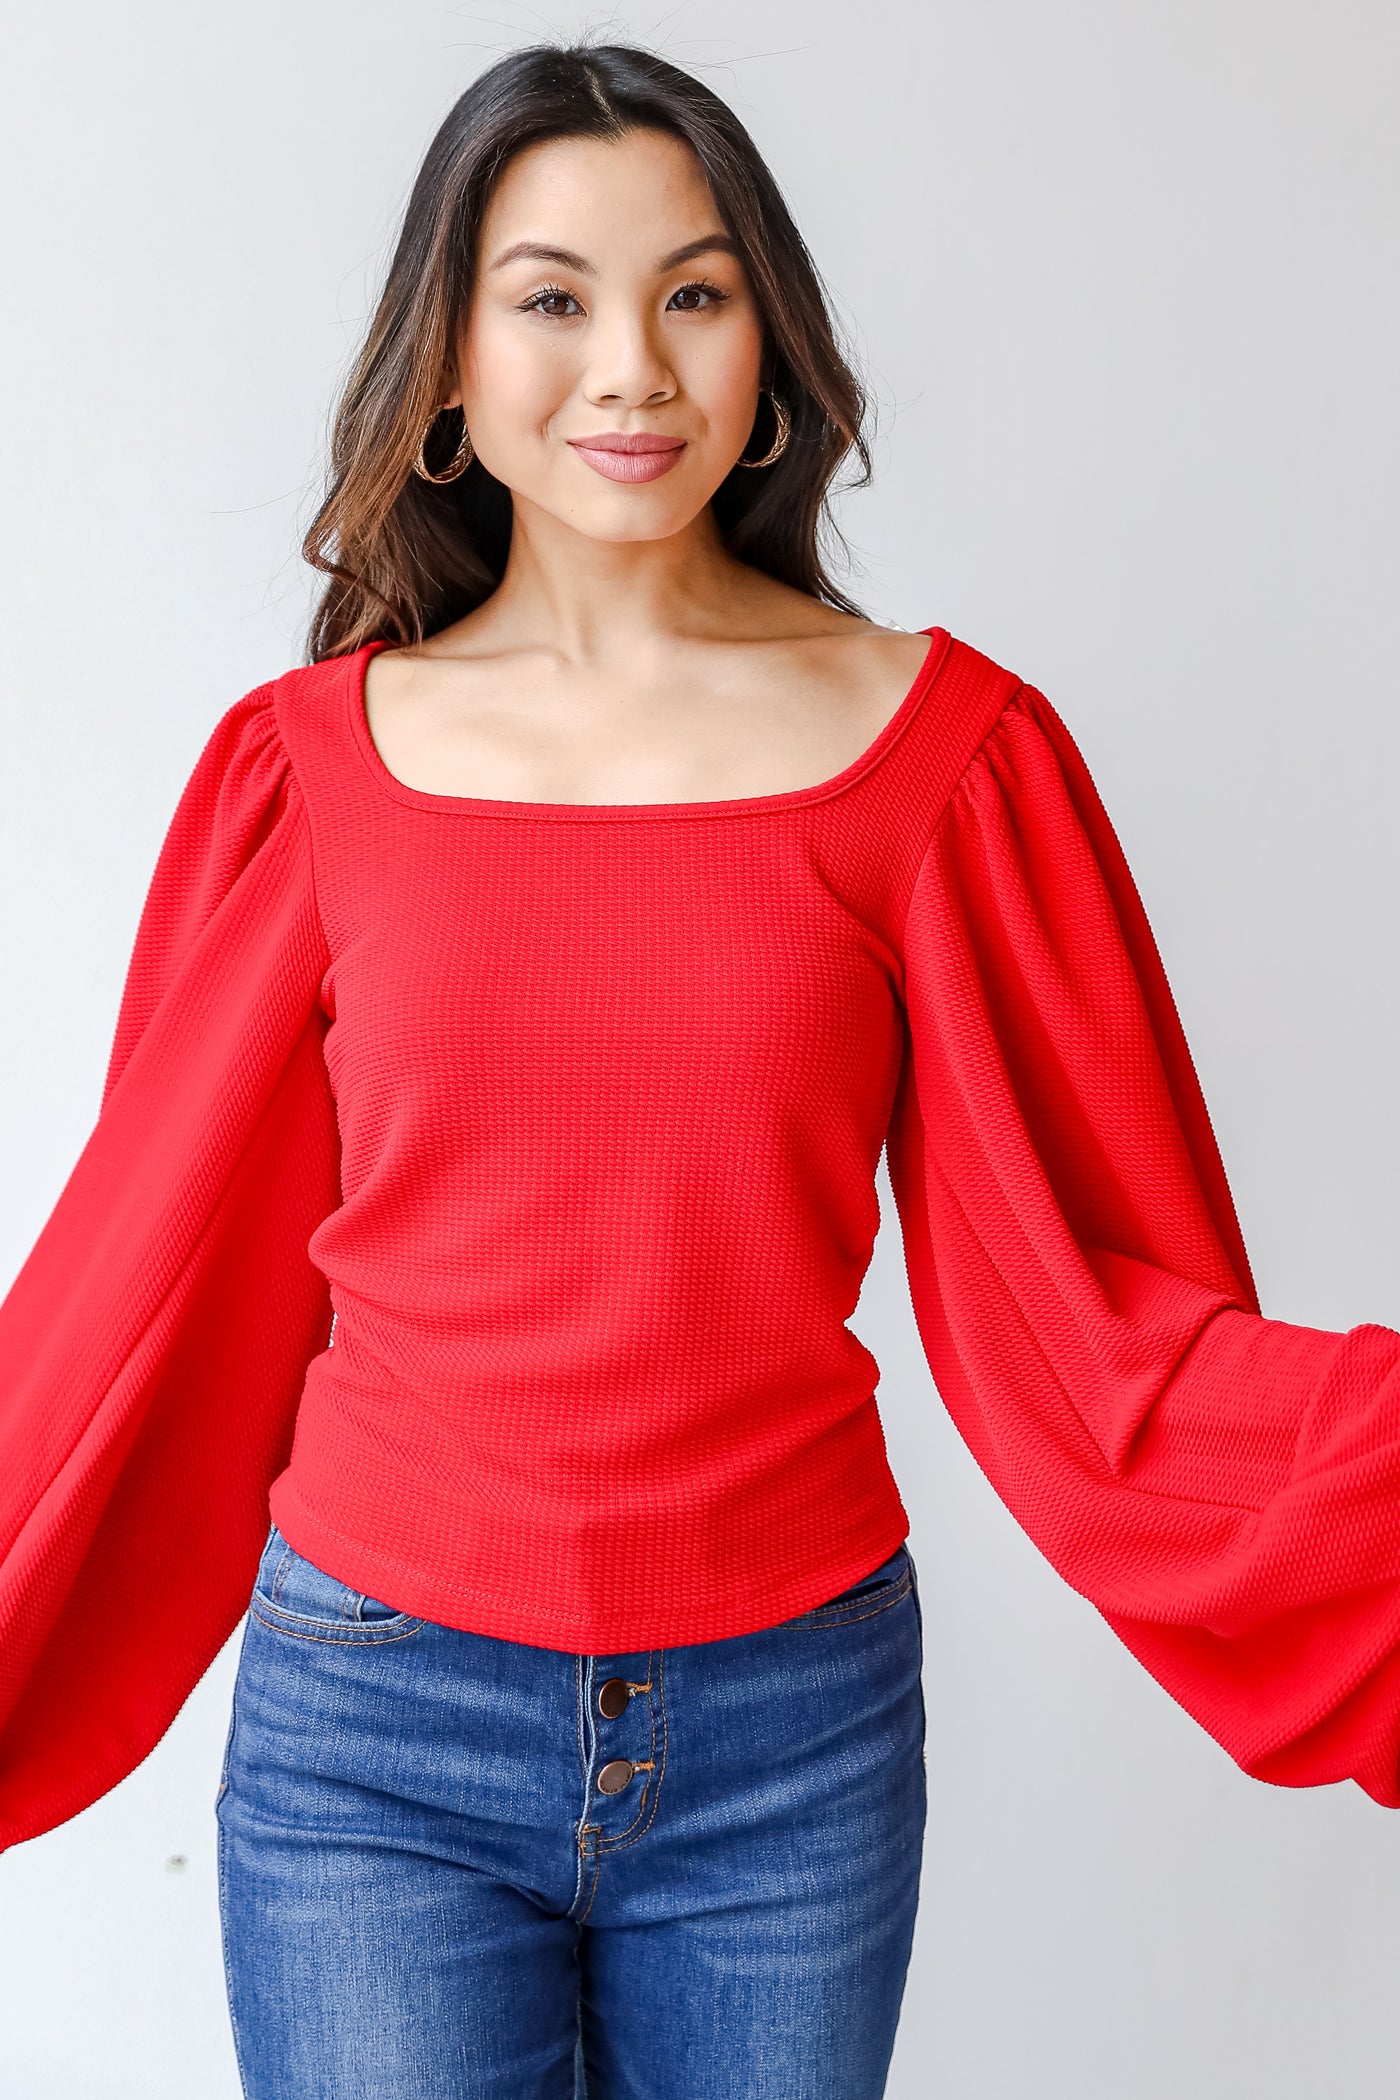 Blouse in red front view